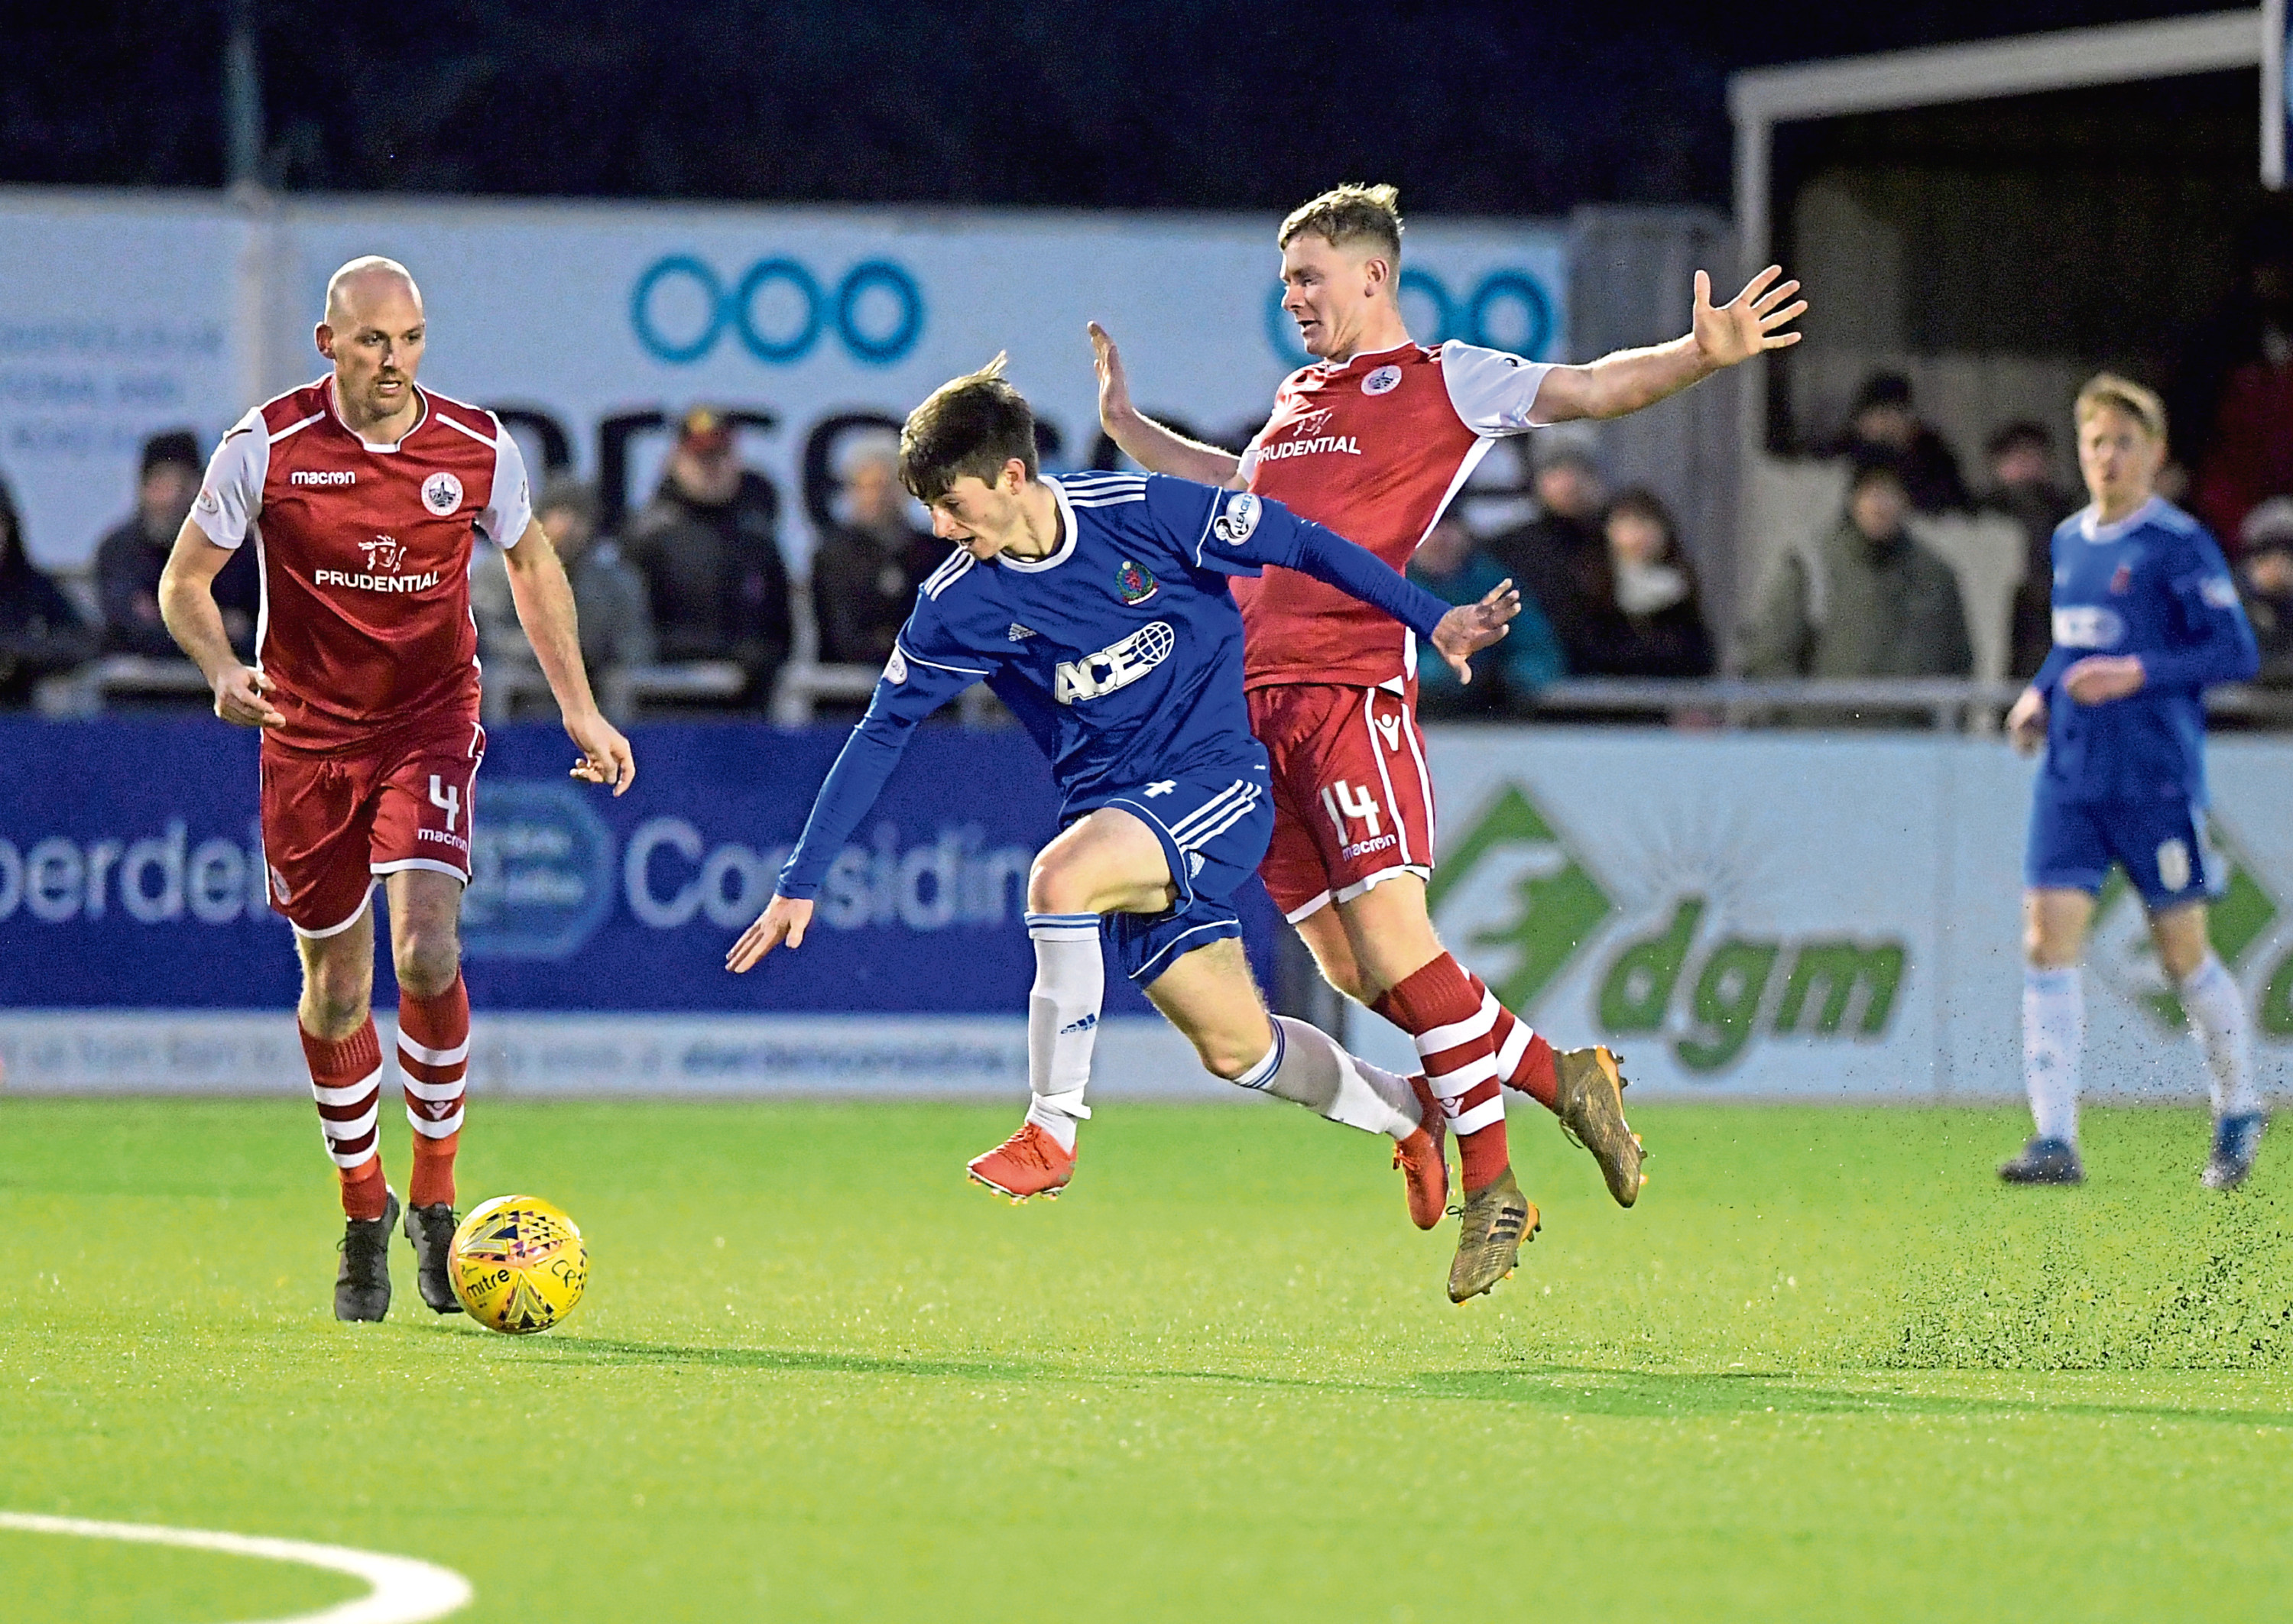 Cove's Declan Glass beats Stirling's Kevin Nicol and Danny Jardine.
Picture by Kath Flannery